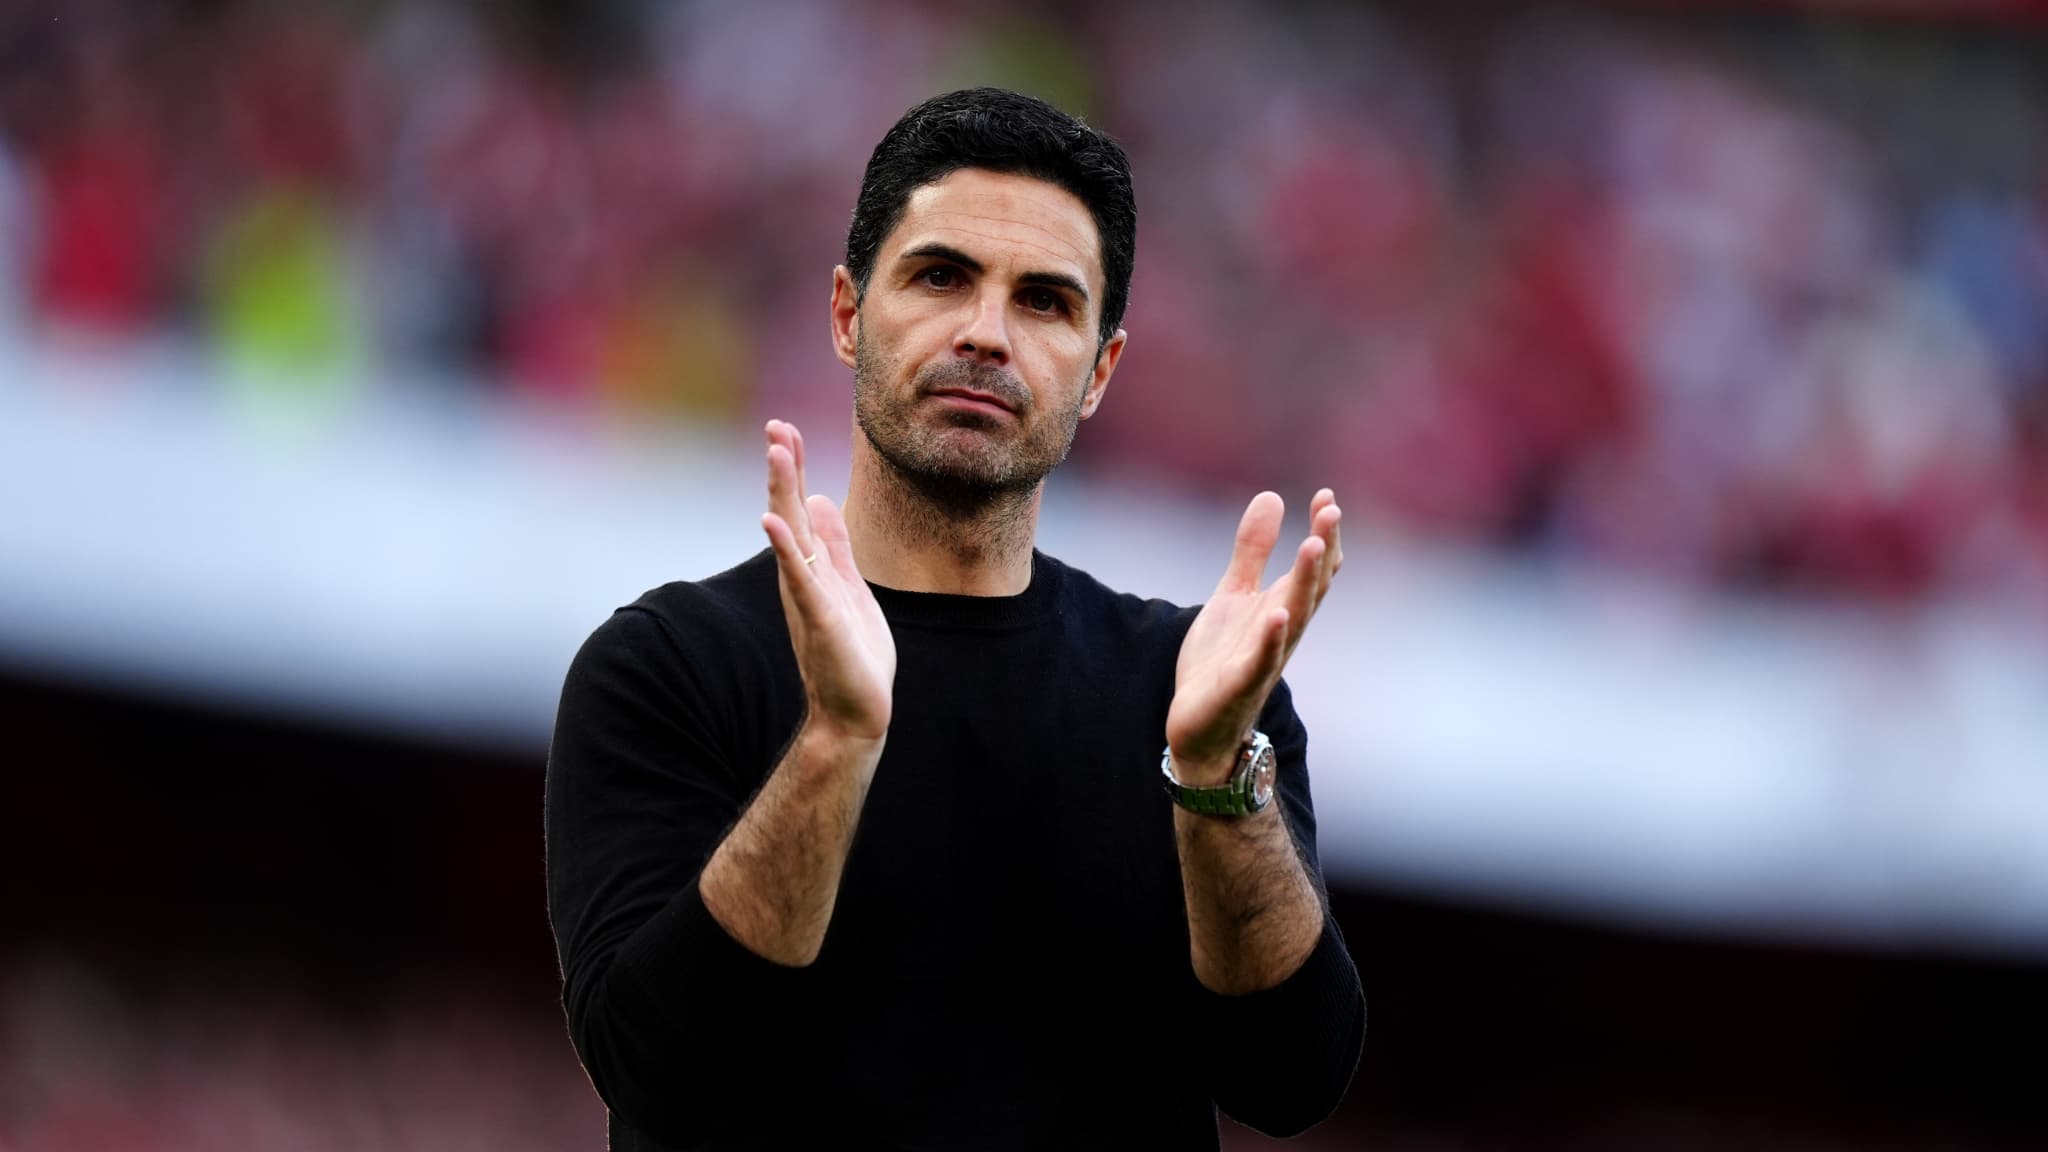 “It will happen eventually”, stripped of the title by City, Arteta is convinced Arsenal will be champions